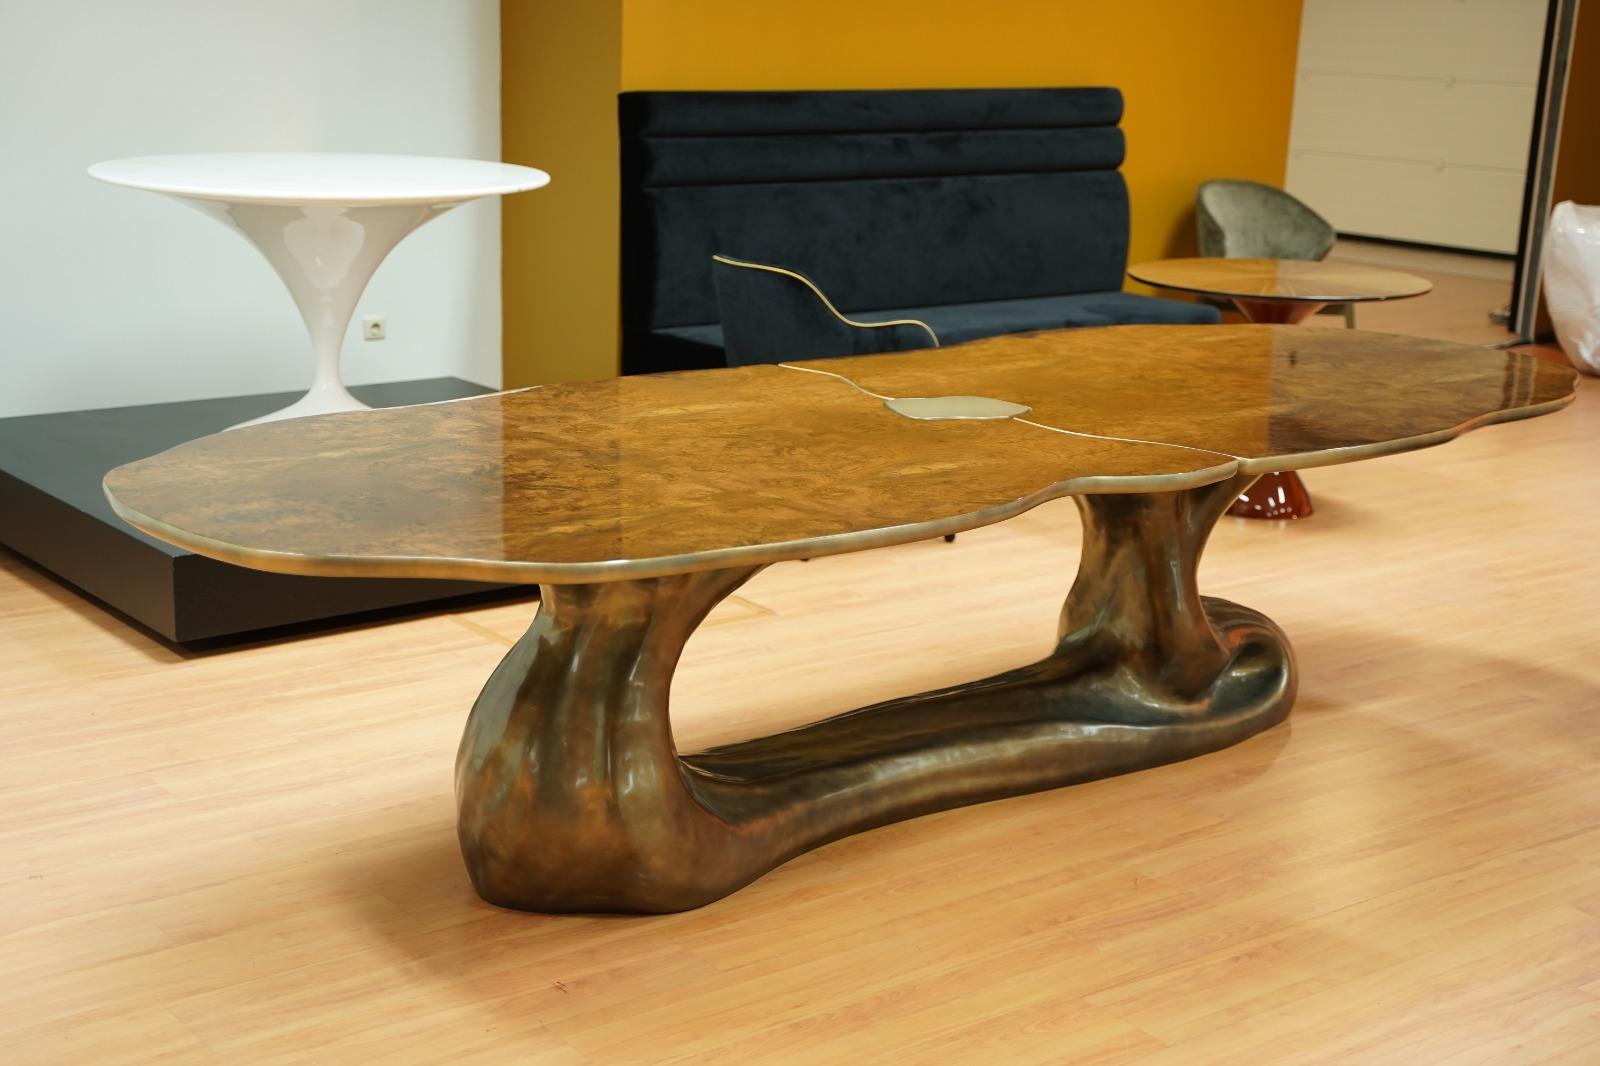 Hand-Crafted New Design Dining Table in Walnut Veneer for 10/12 Persons Ready Delivery Now